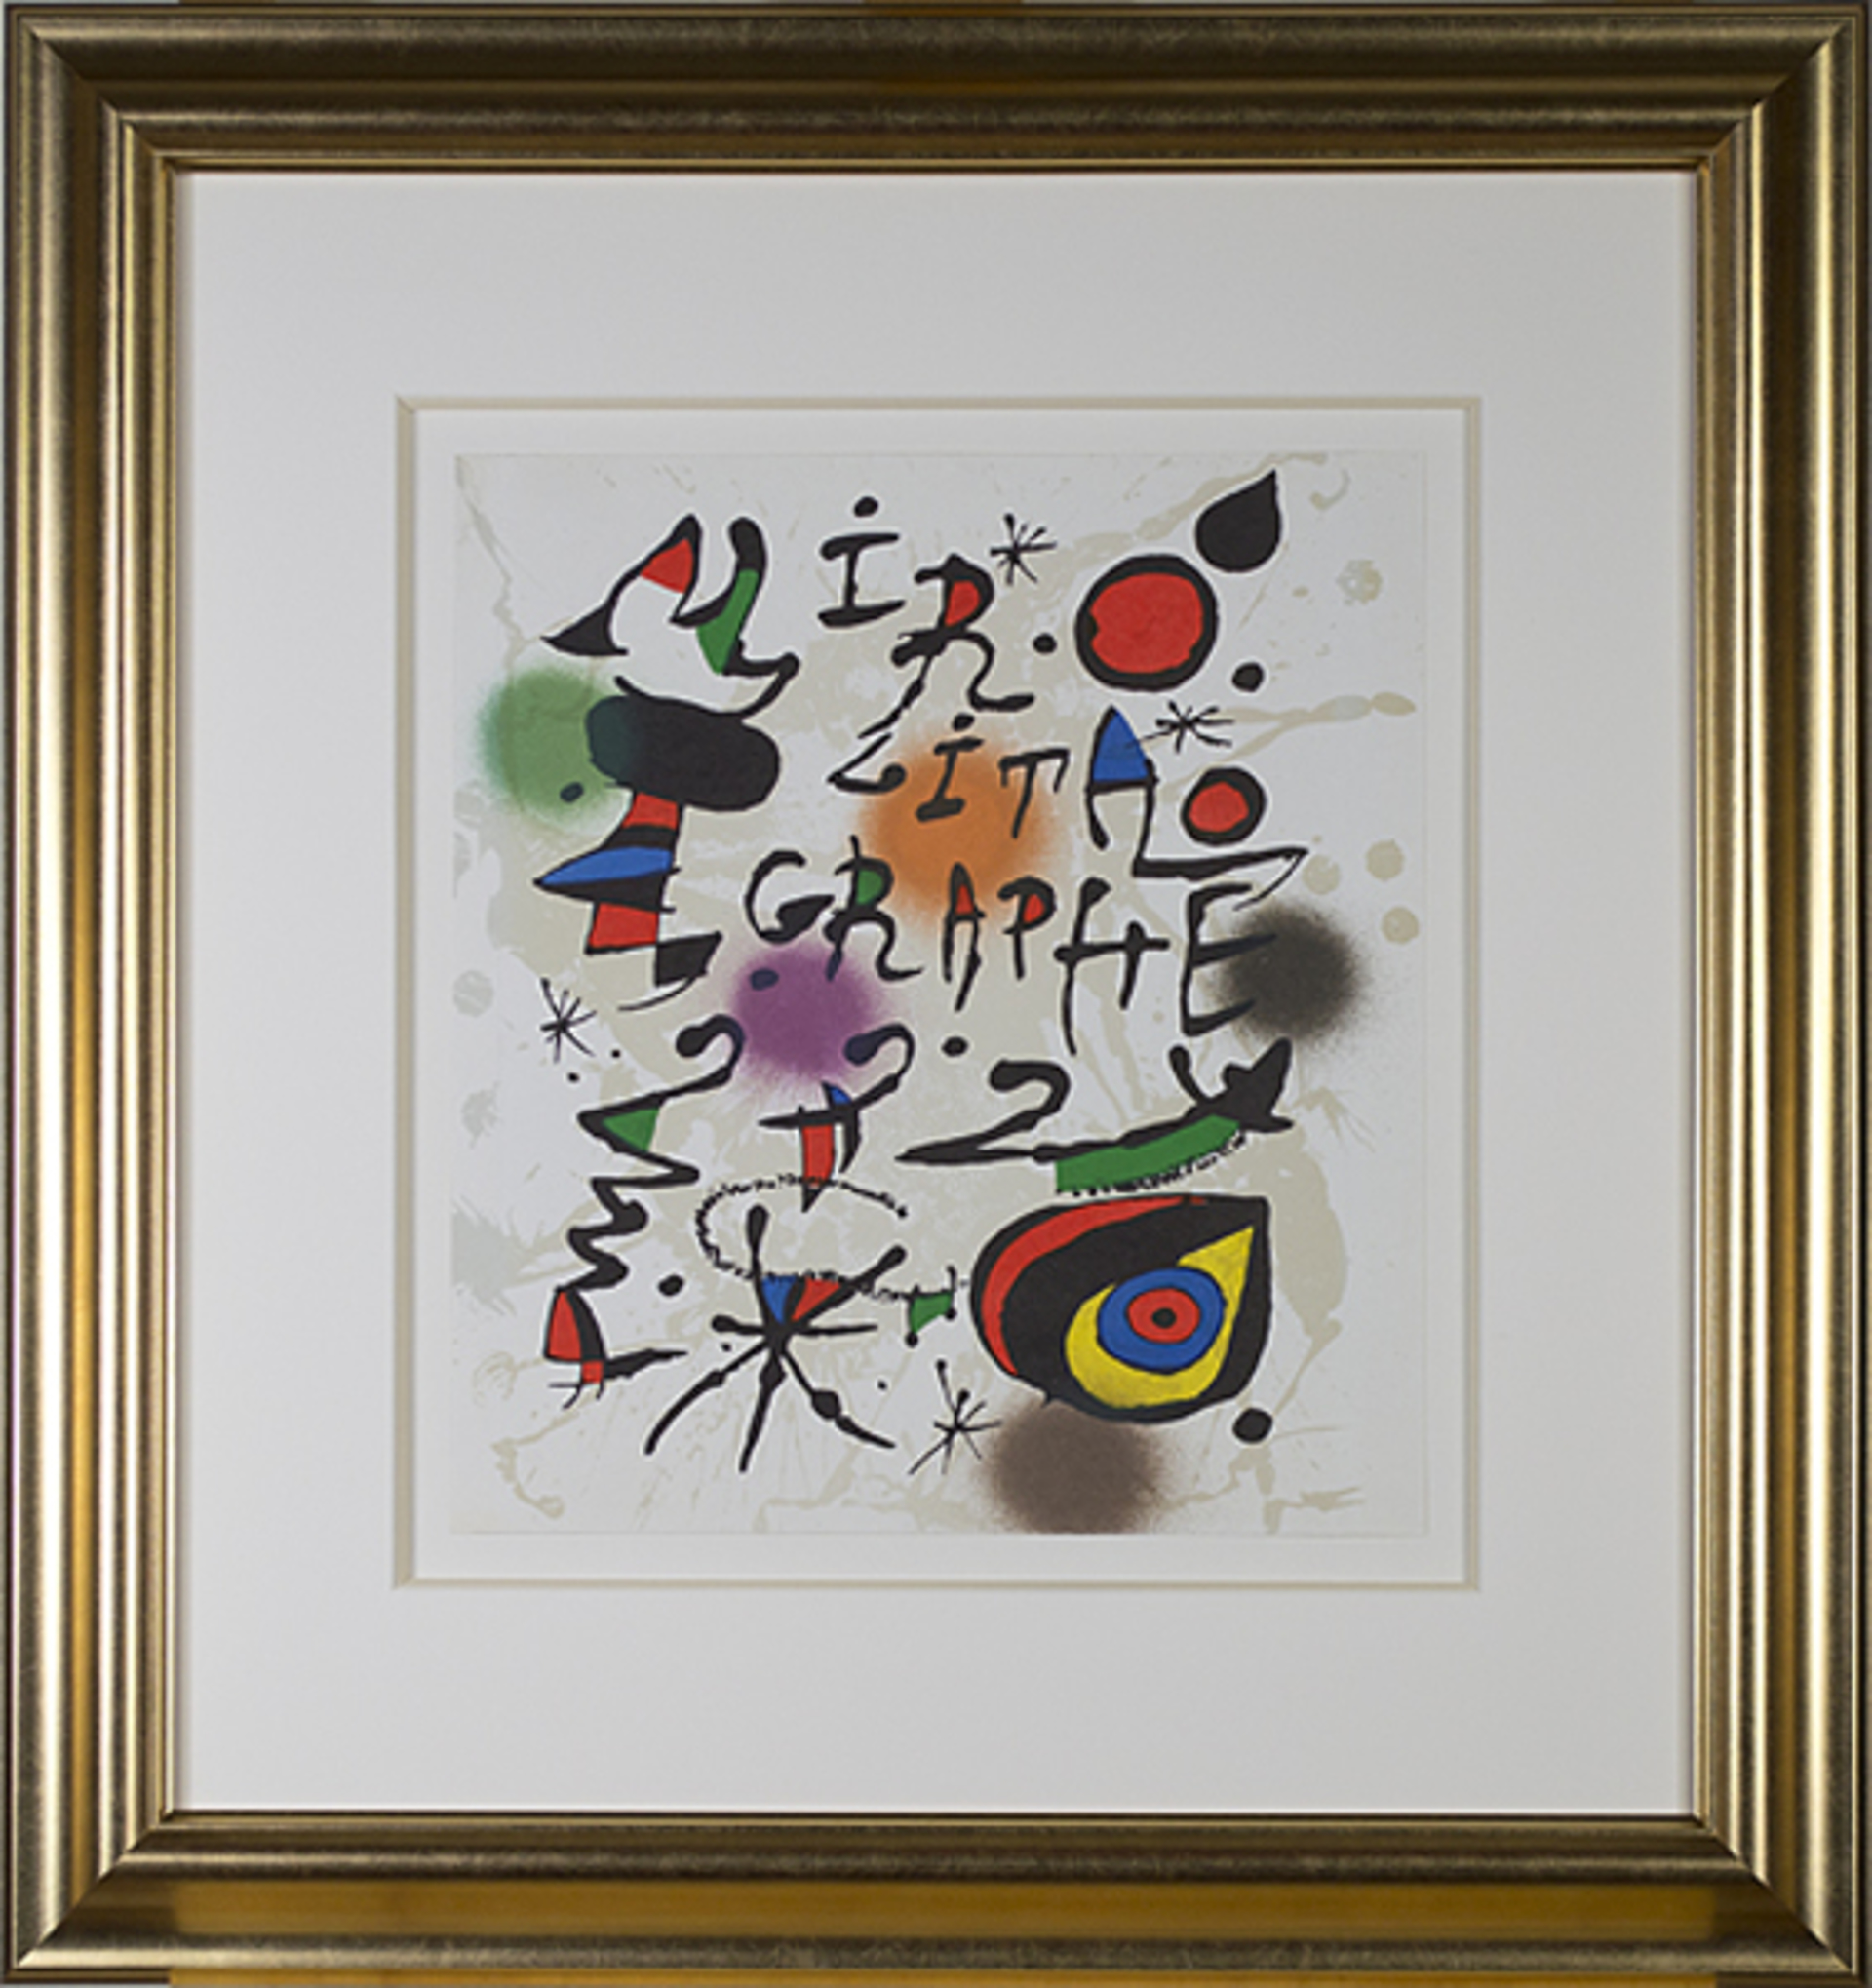 Lithographs III Cover from "Miro Lithographs III, Maeght Publisher" by Joan Miró